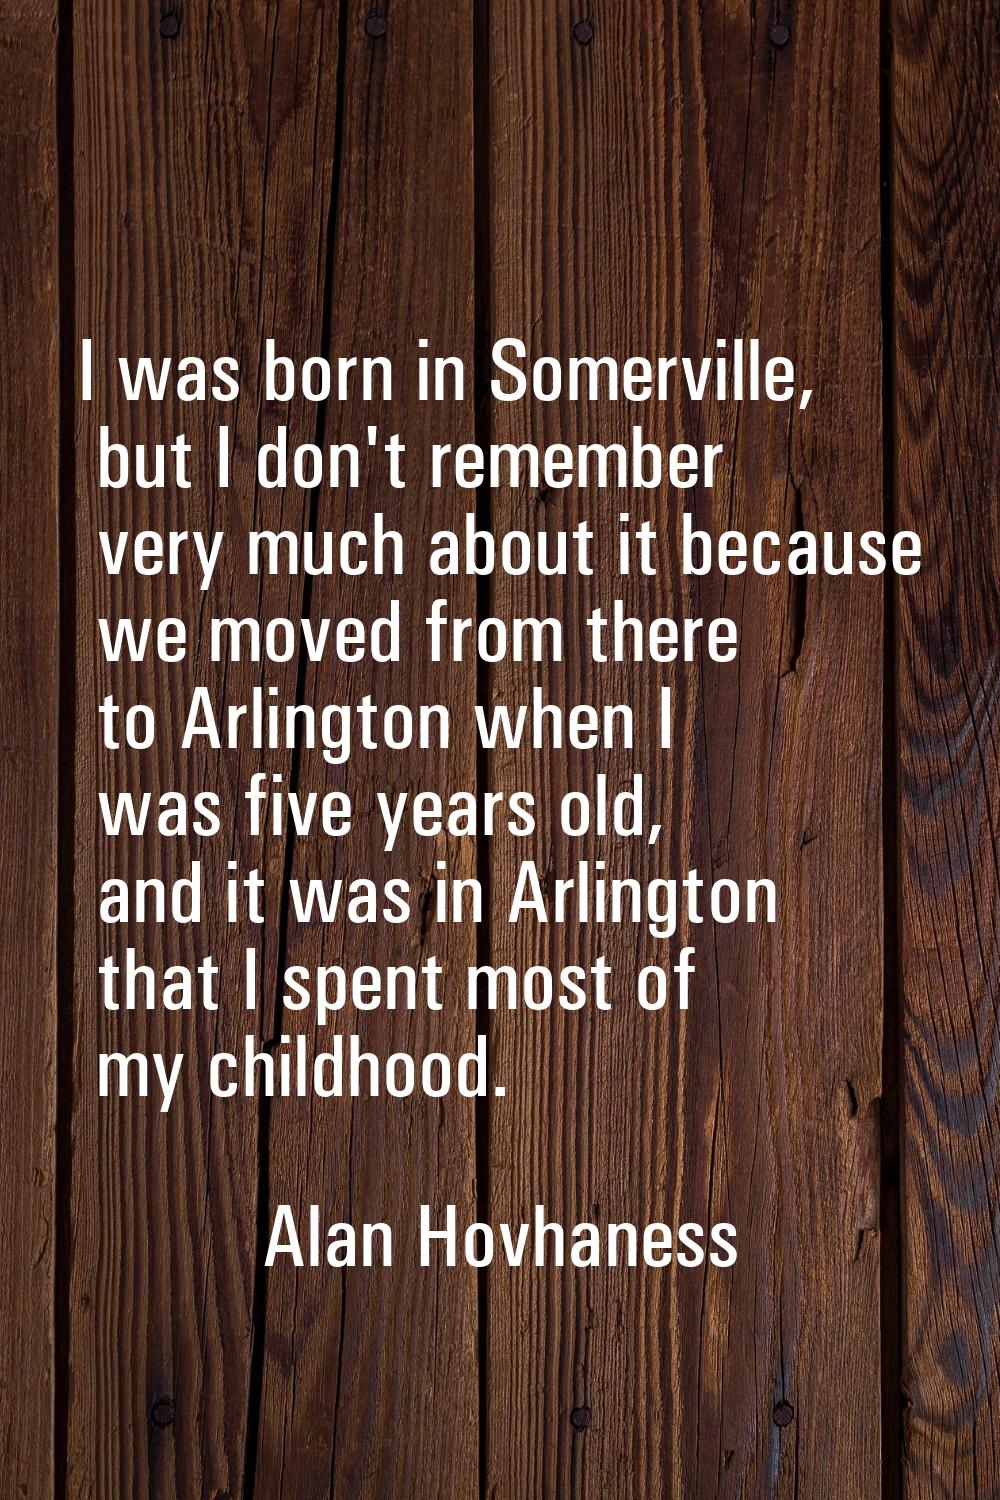 I was born in Somerville, but I don't remember very much about it because we moved from there to Ar